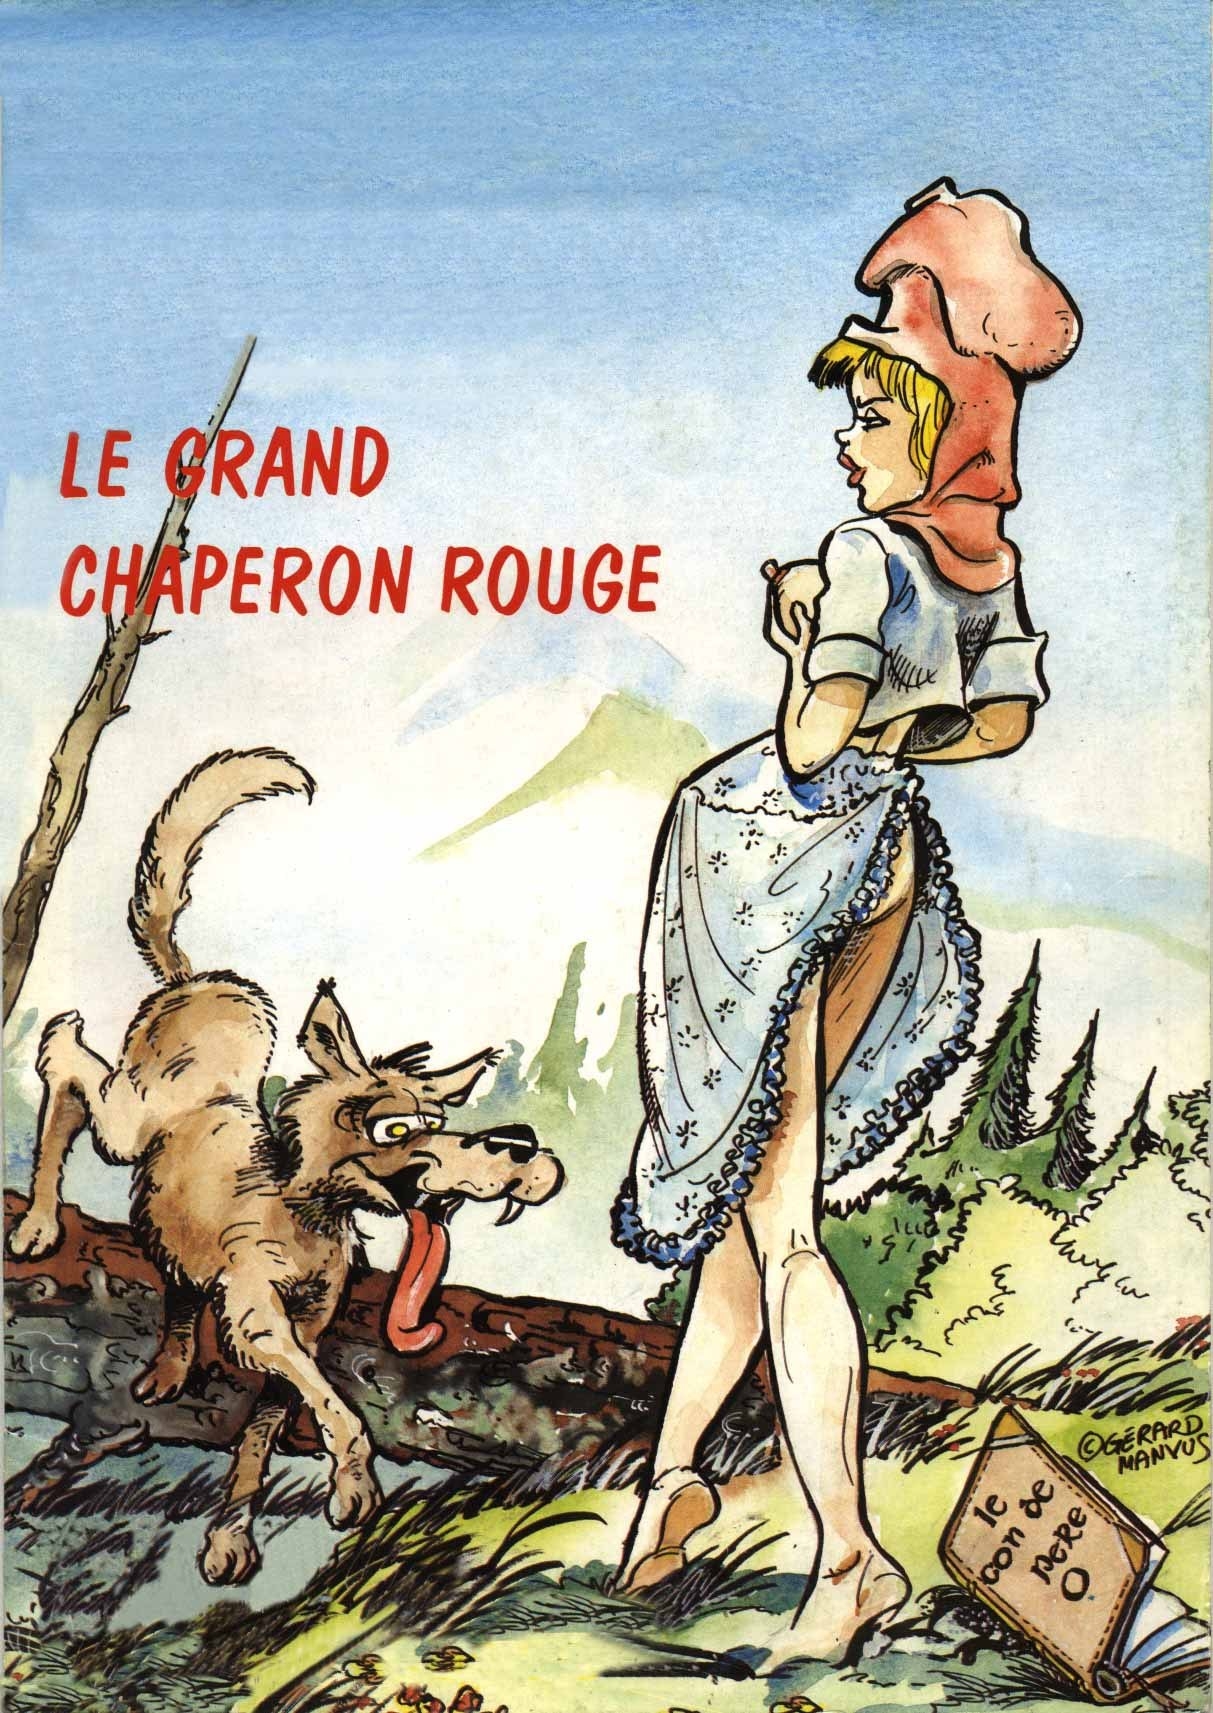 [Manvussa] Le grand chaperon rouge [French] 0